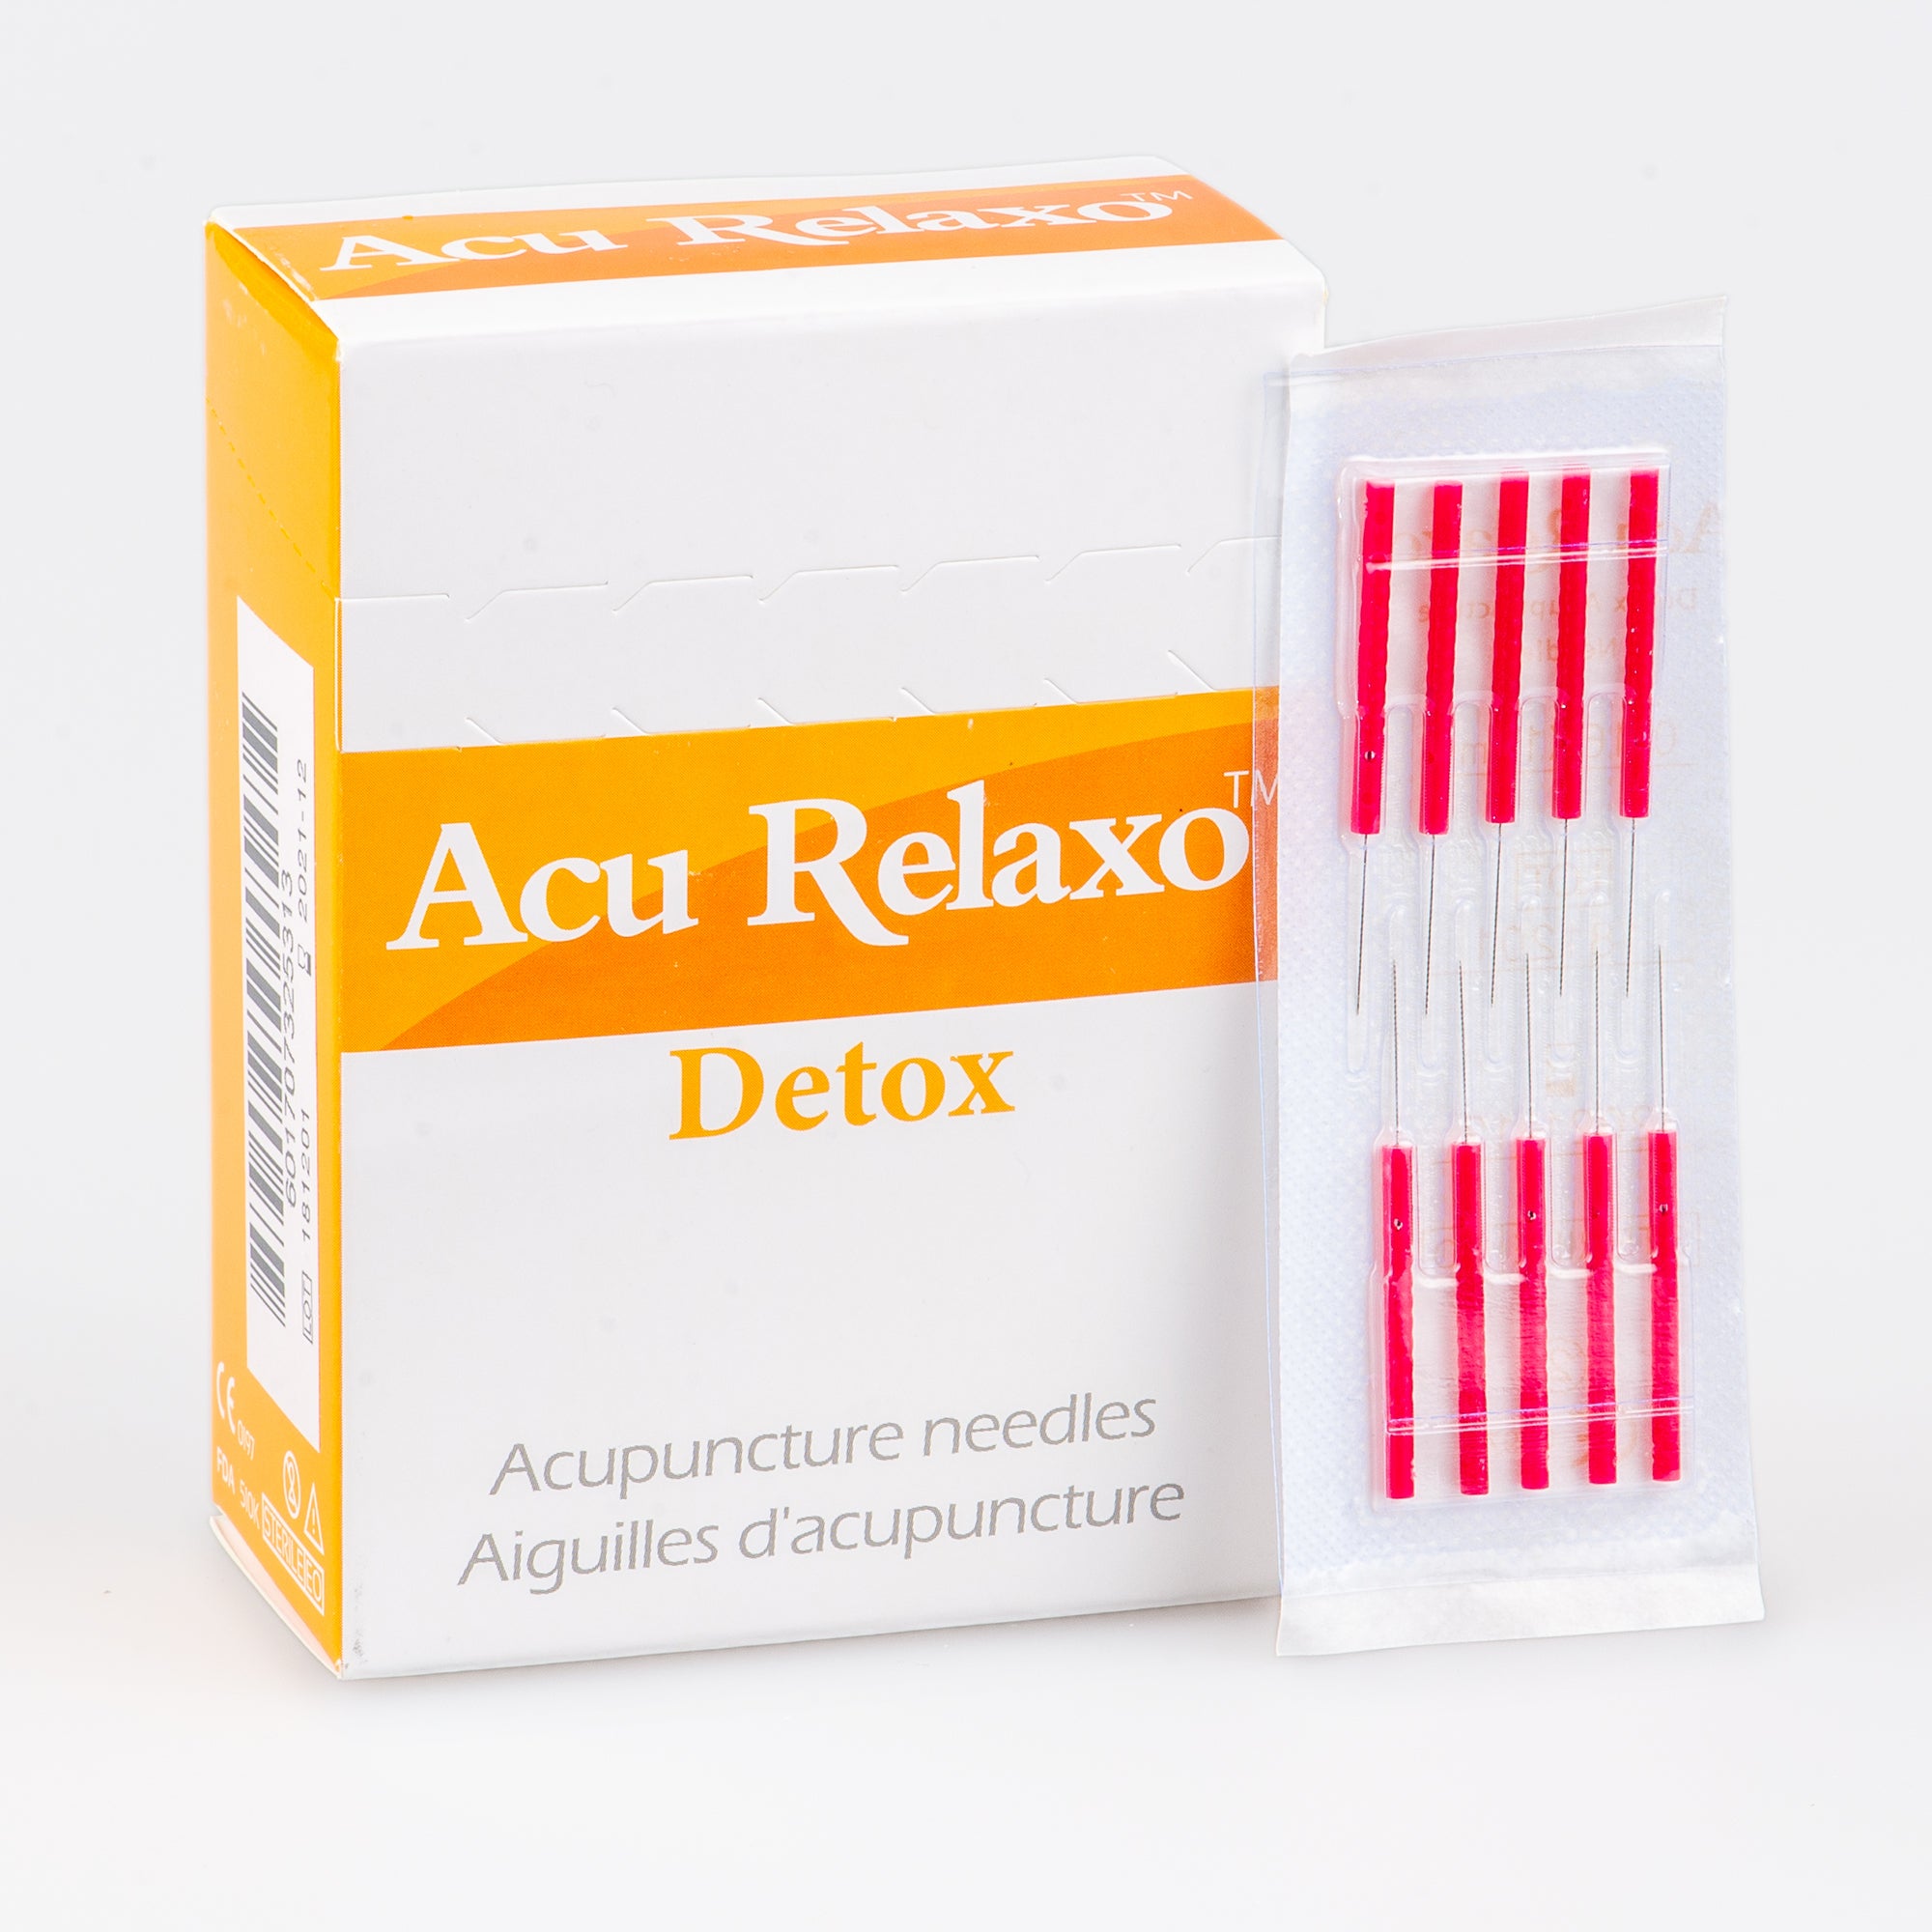 Acu Relaxo™ Detox Acupuncture Needles 200 / box